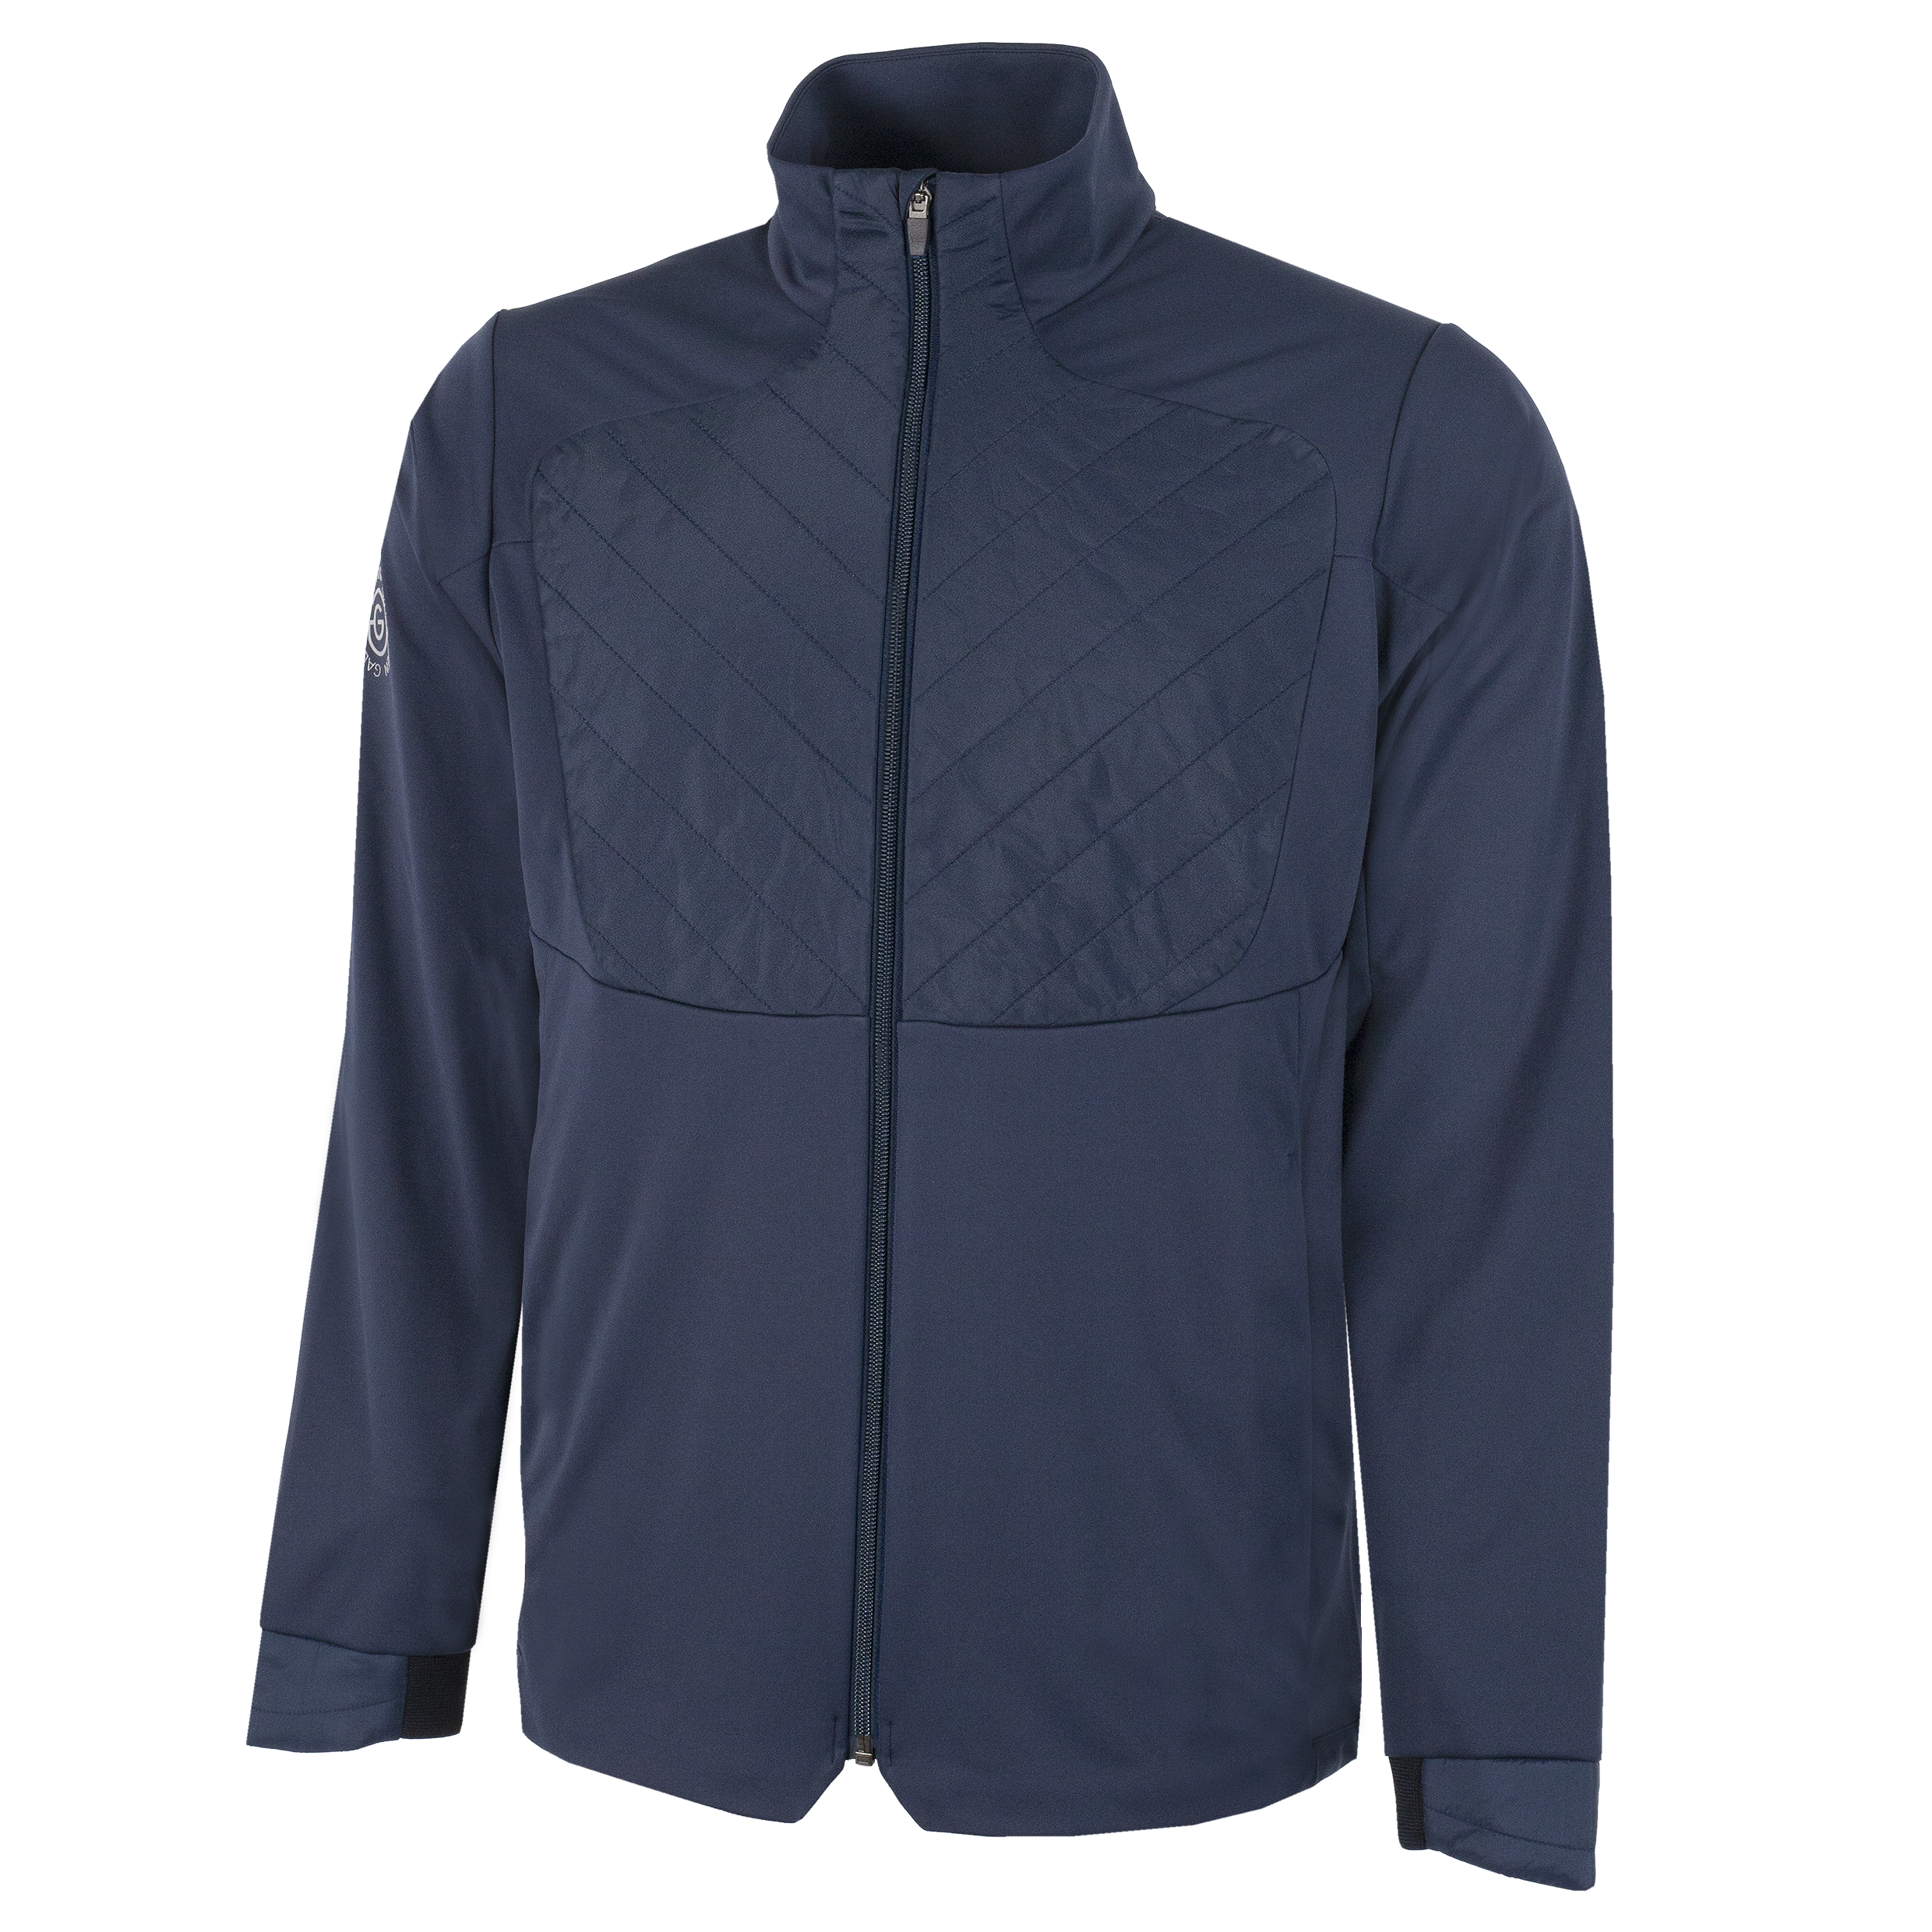 navy 'LINC'  windproof golf jacket in INTERFACE-1™ stretch fabric.